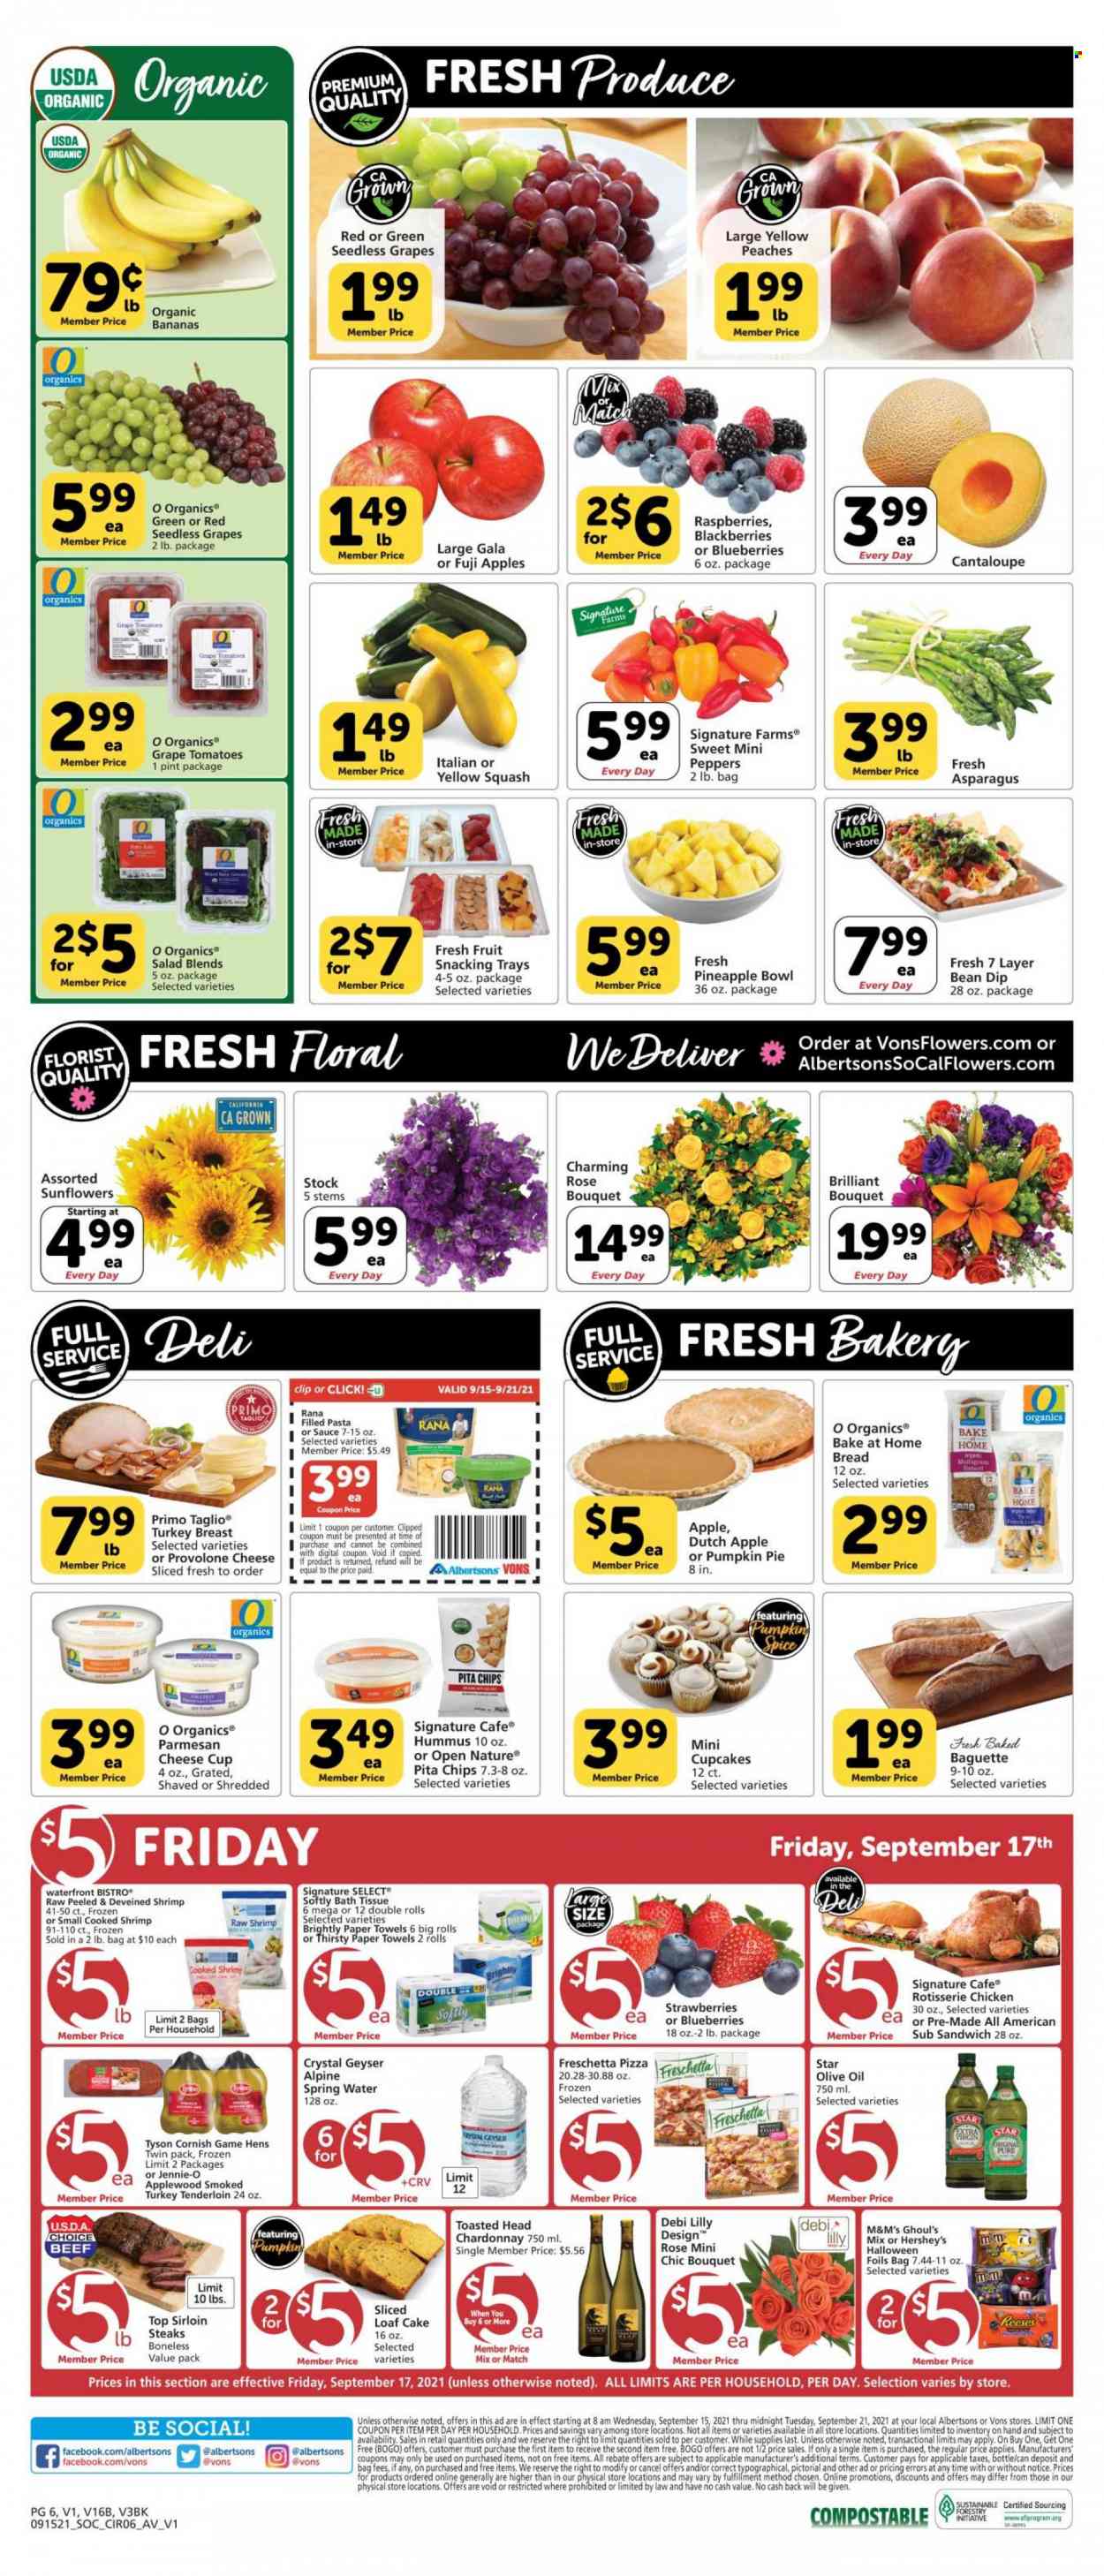 thumbnail - Vons Flyer - 09/15/2021 - 09/21/2021 - Sales products - seedless grapes, baguette, bread, cake, pie, cupcake, loaf cake, asparagus, cantaloupe, salad, peppers, yellow squash, apples, bananas, blackberries, blueberries, Gala, strawberries, pineapple, Fuji apple, turkey breast, turkey tenderloin, steak, sirloin steak, shrimps, pizza, chicken roast, sandwich, Giovanni Rana, Rana, filled pasta, hummus, cheese cup, parmesan, Provolone, dip, Reese's, Hershey's, M&M's, pita chips, spice, olive oil, oil, spring water, white wine, Chardonnay, rosé wine, bath tissue, kitchen towels, paper towels, cup, bouquet, rose, peaches. Page 6.